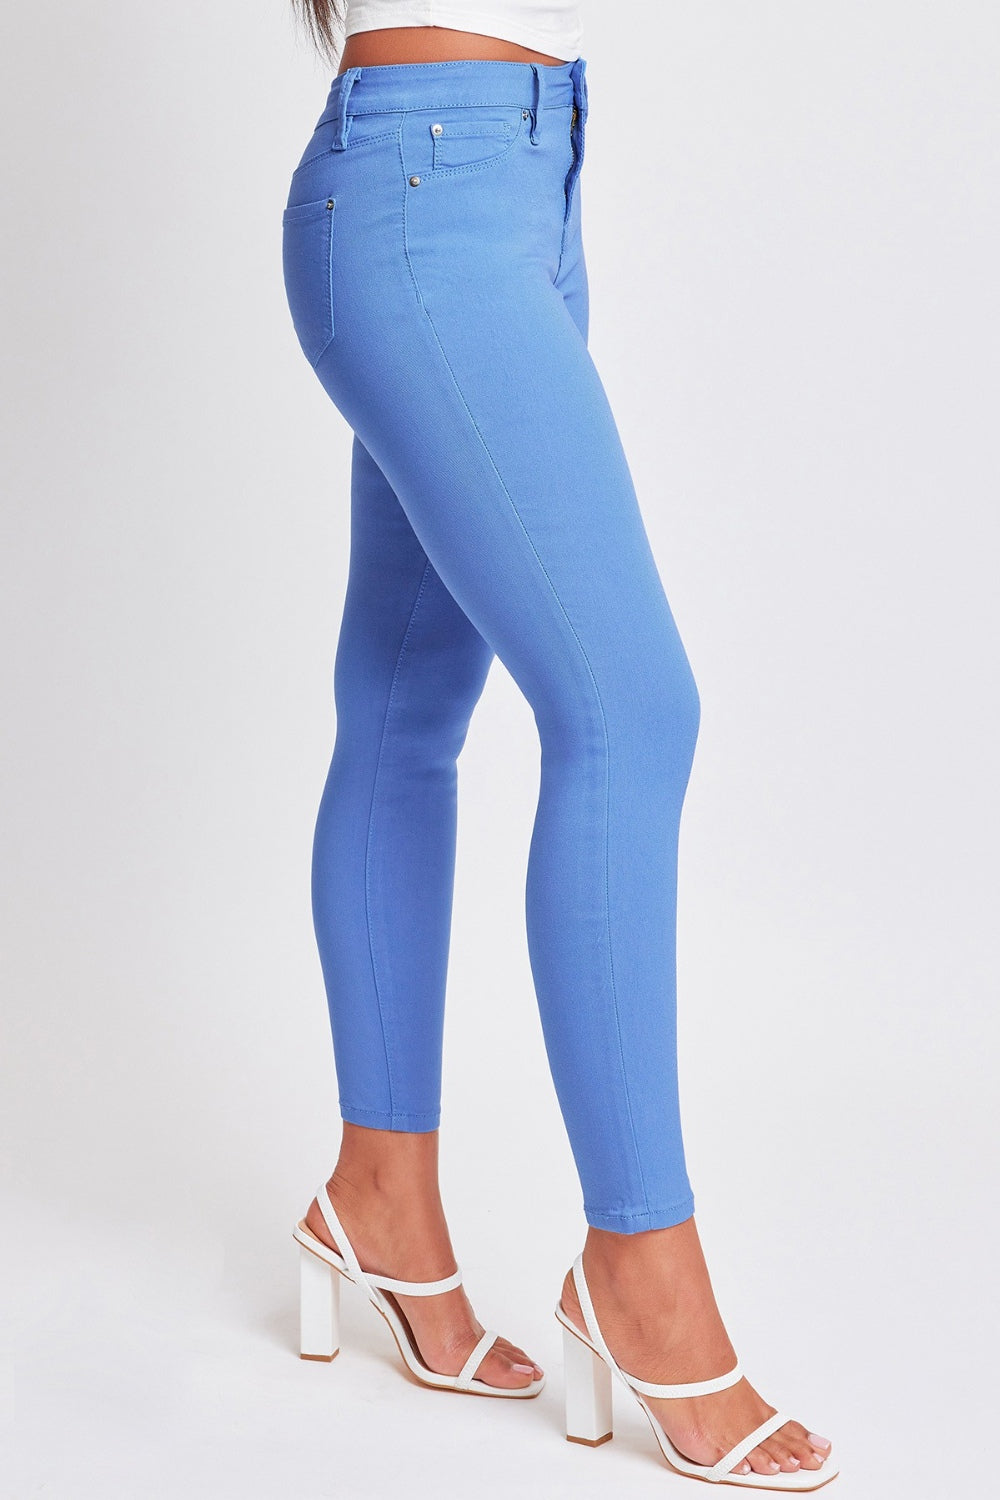 Shop YMI Hyperstretch Mid-Rise Skinny Pants for a flattering fit, versatile style, and ultimate comfort. Find your perfect pair today!